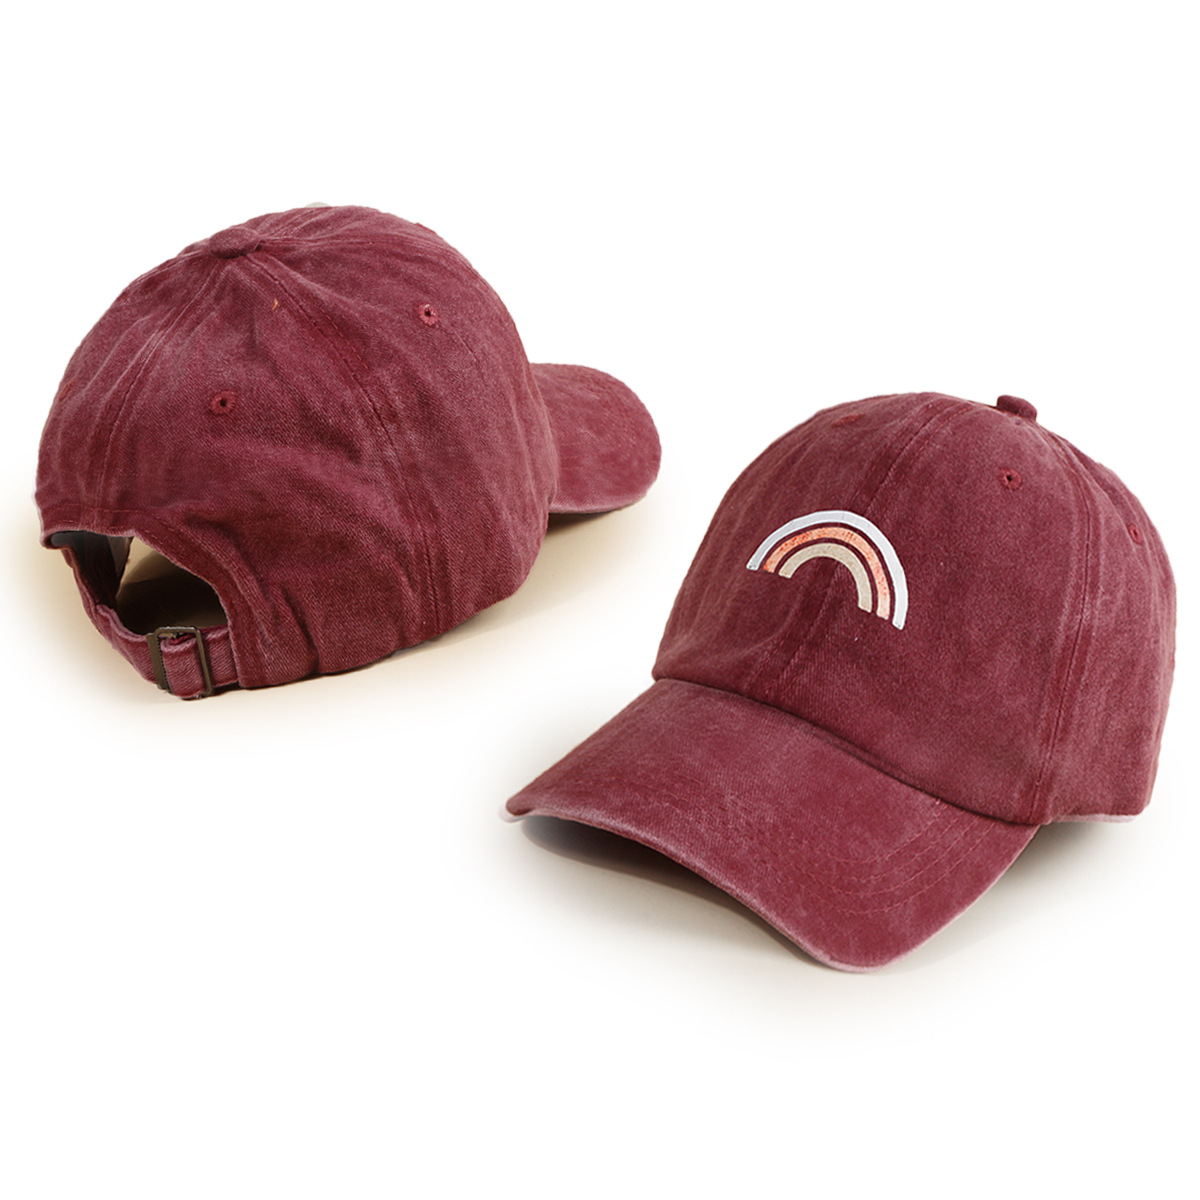 Wine-red Hat Women's Rainbow Washed Baseball Cap Wide Brim Sunshade All-match Face-looking Small Peaked Cap Men's Korean-style Fashion display picture 3